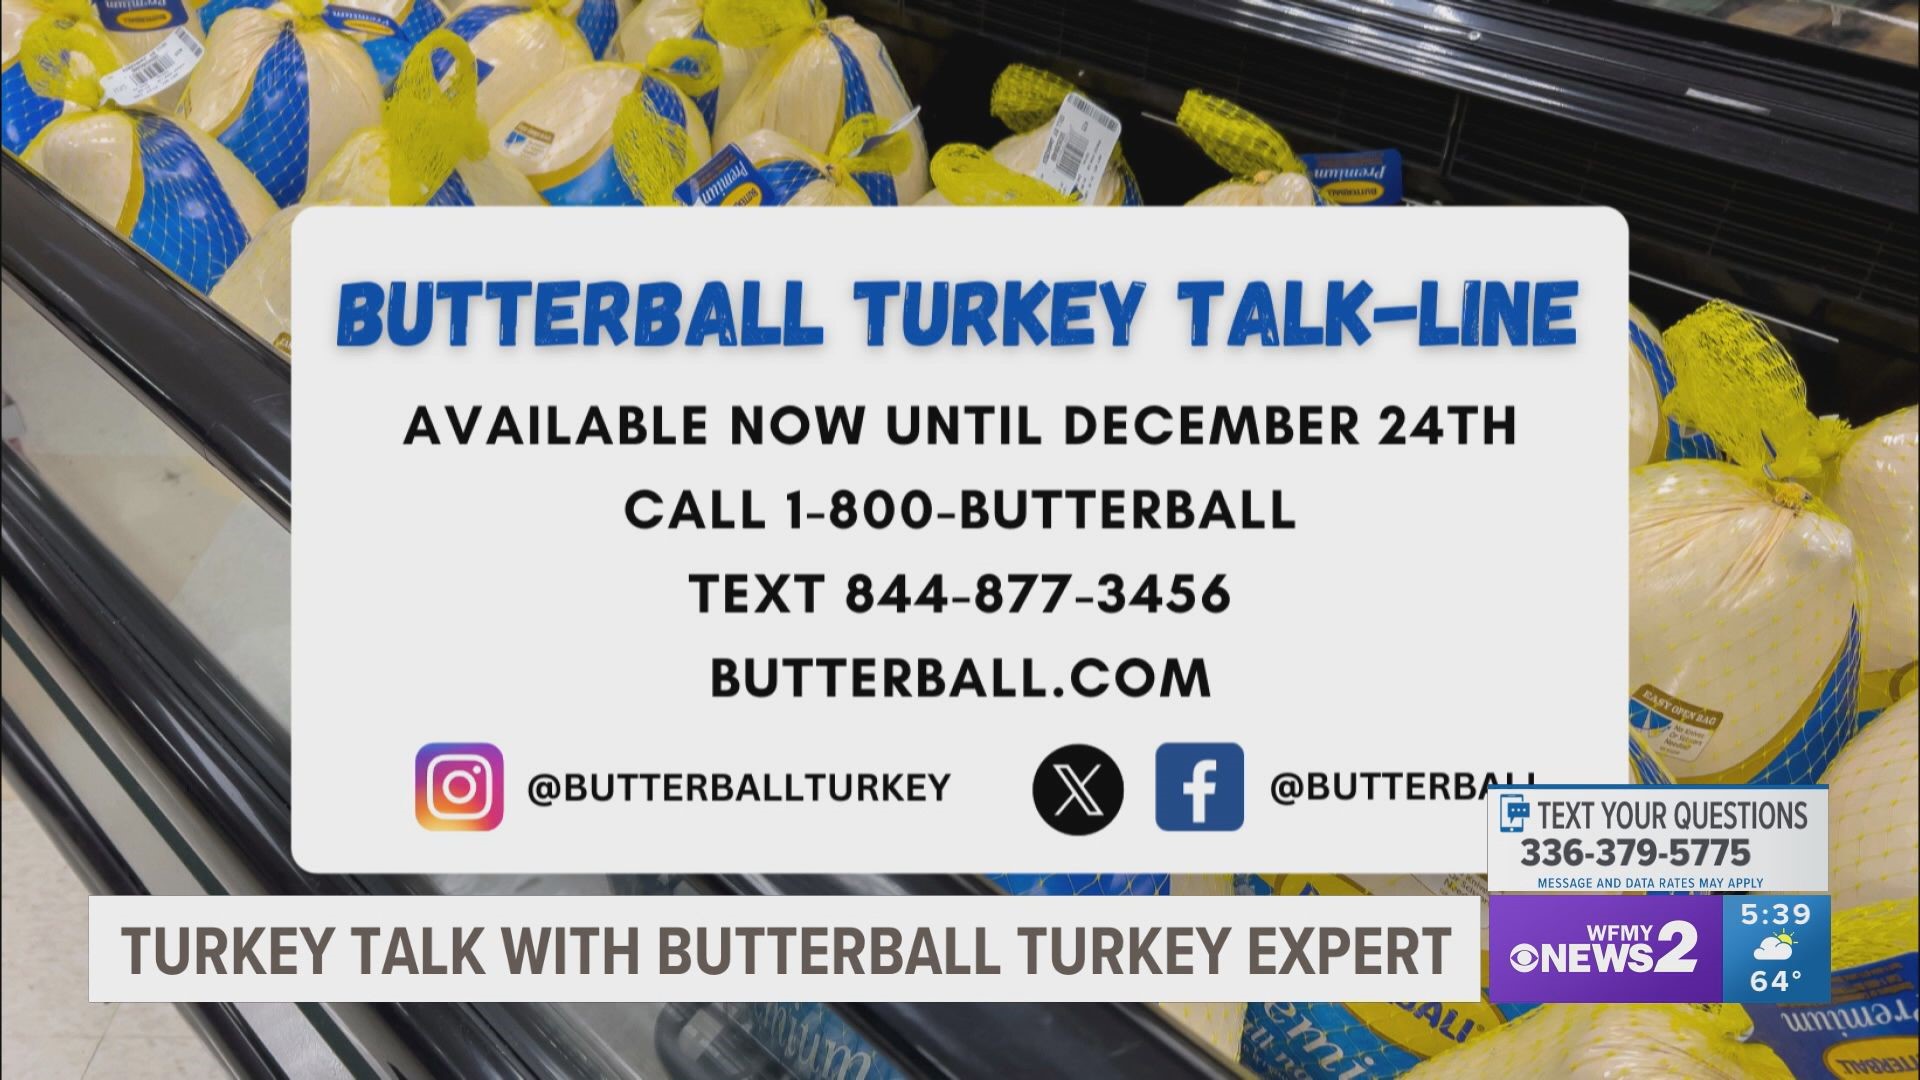 A Butterball Turkey Talk-line expert joins “2 Wants to Know” to explain the proper way to thaw your turkey and gives cooking tips.